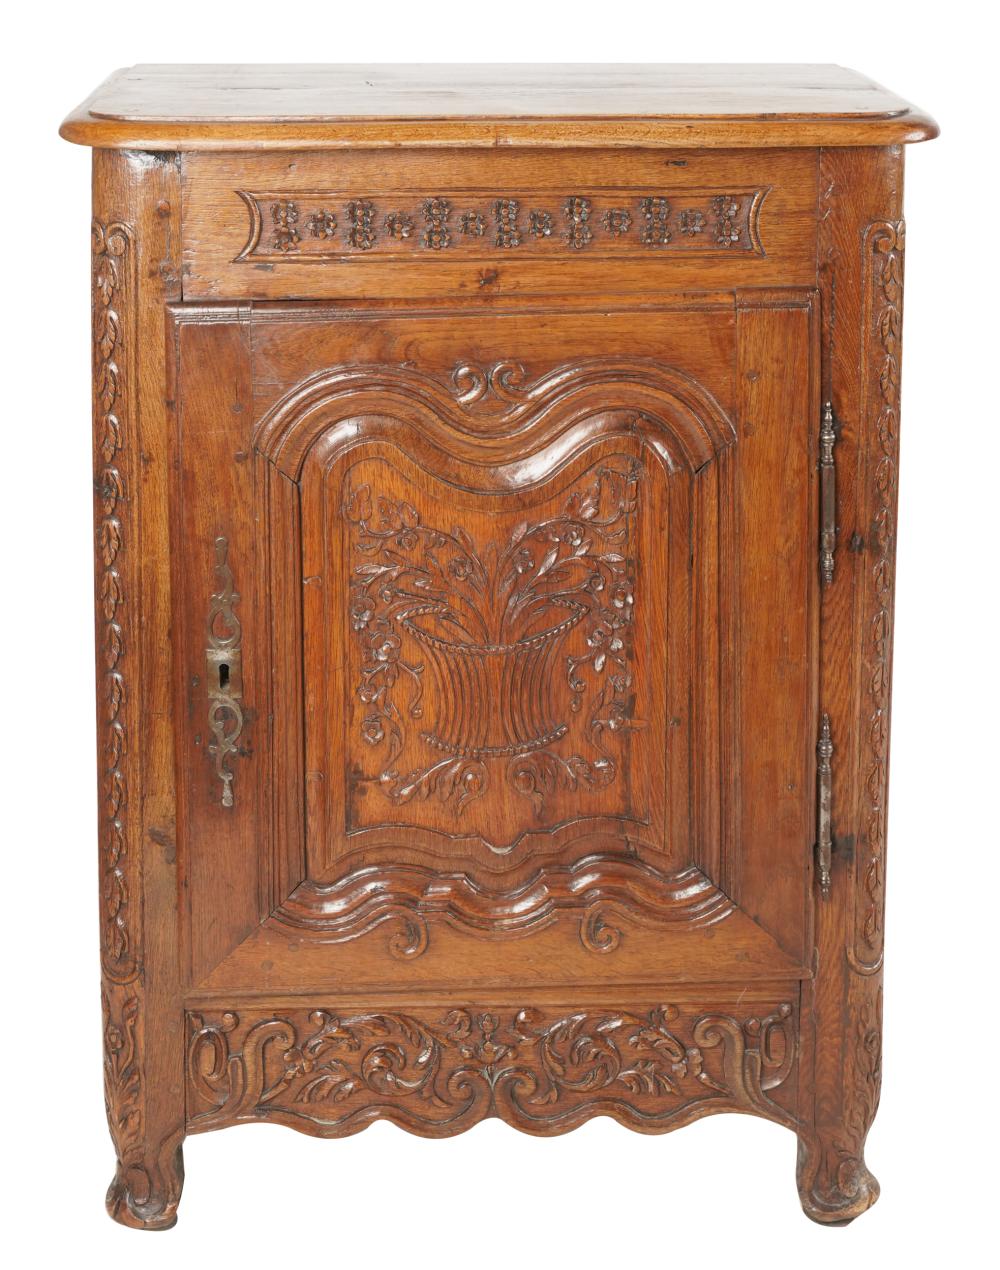 LOUIS XV PROVINCIAL-STYLE CARVED